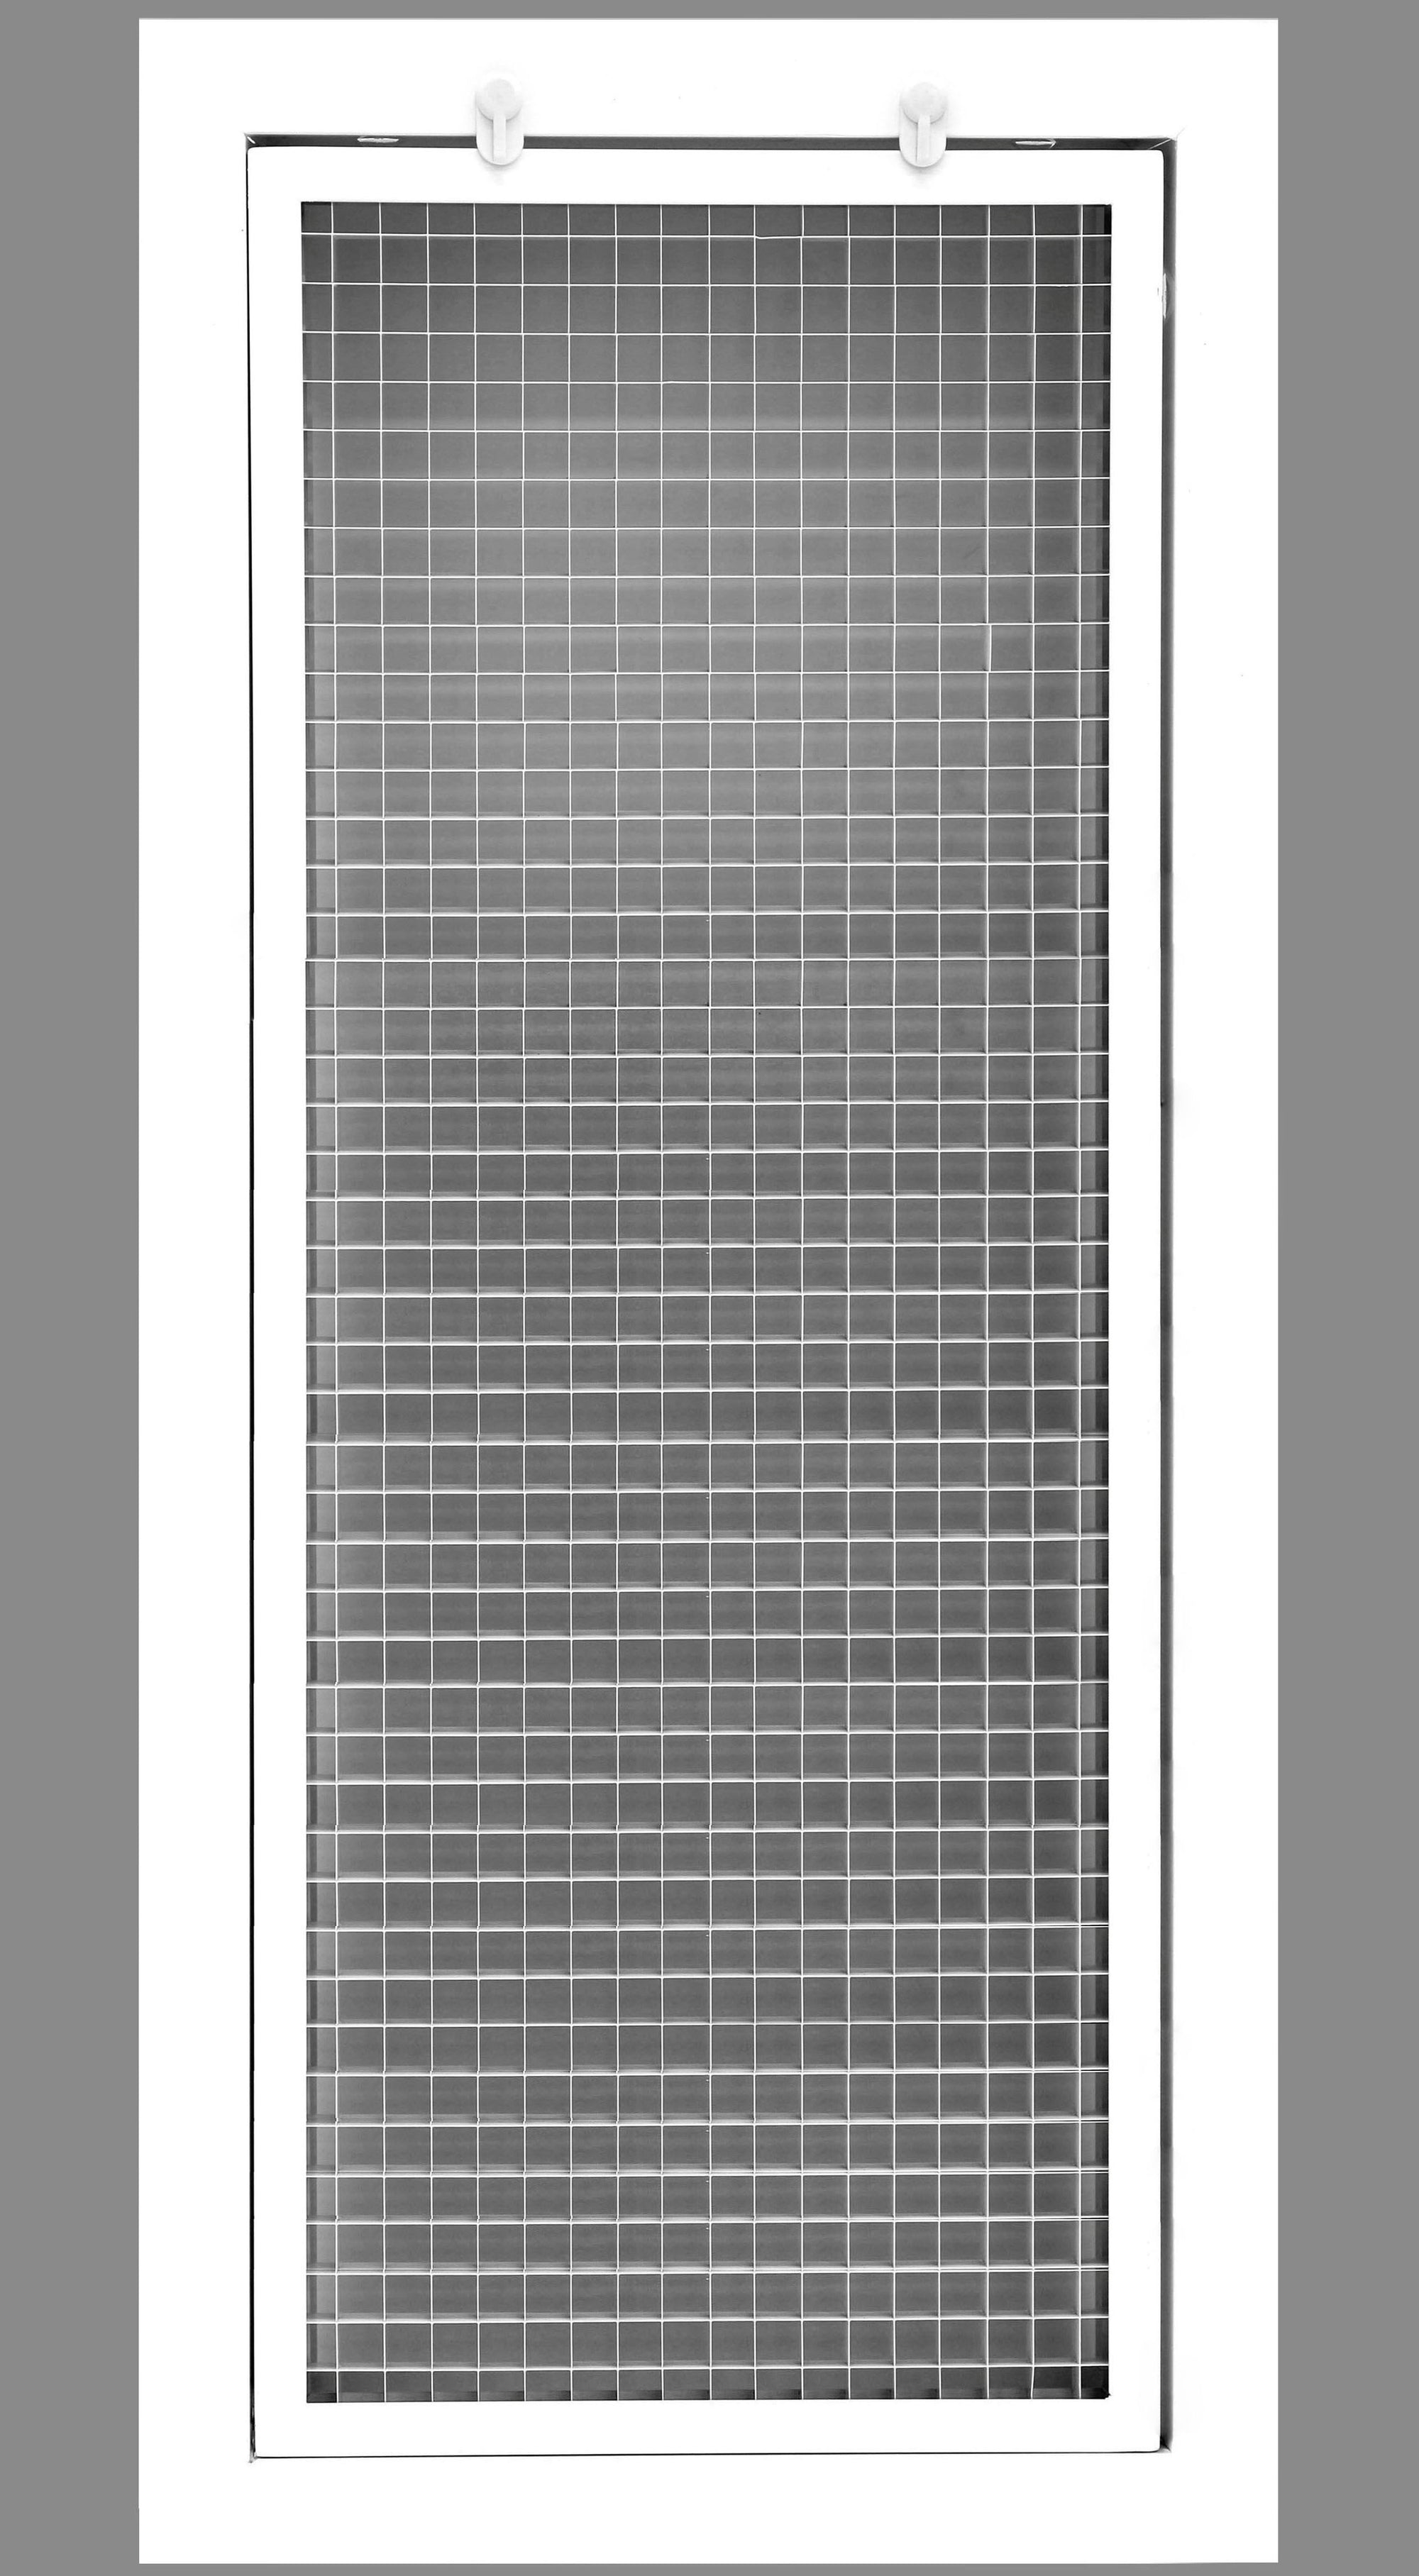 6" x 32" Cube Core Eggcrate Return Air Filter Grille for 1" Filter